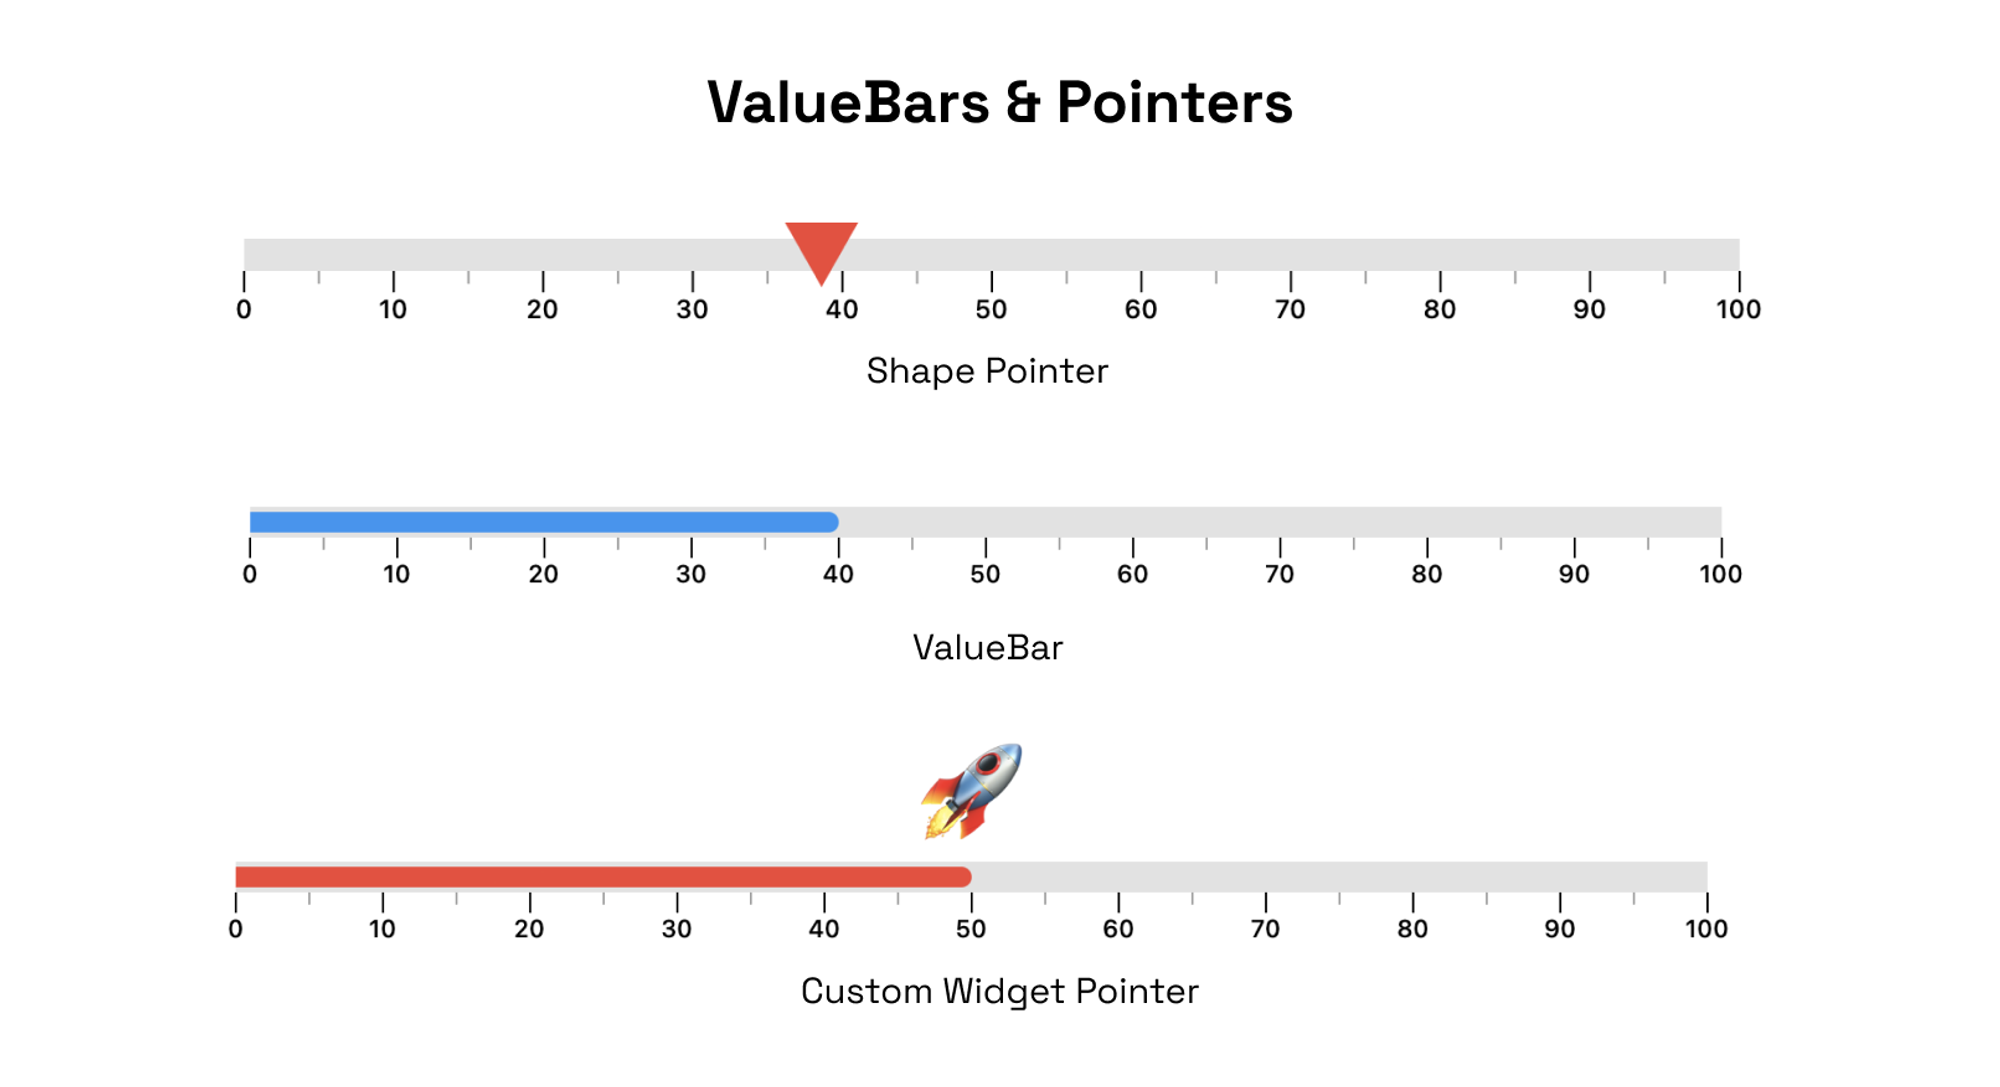 ValueBars and Pointers